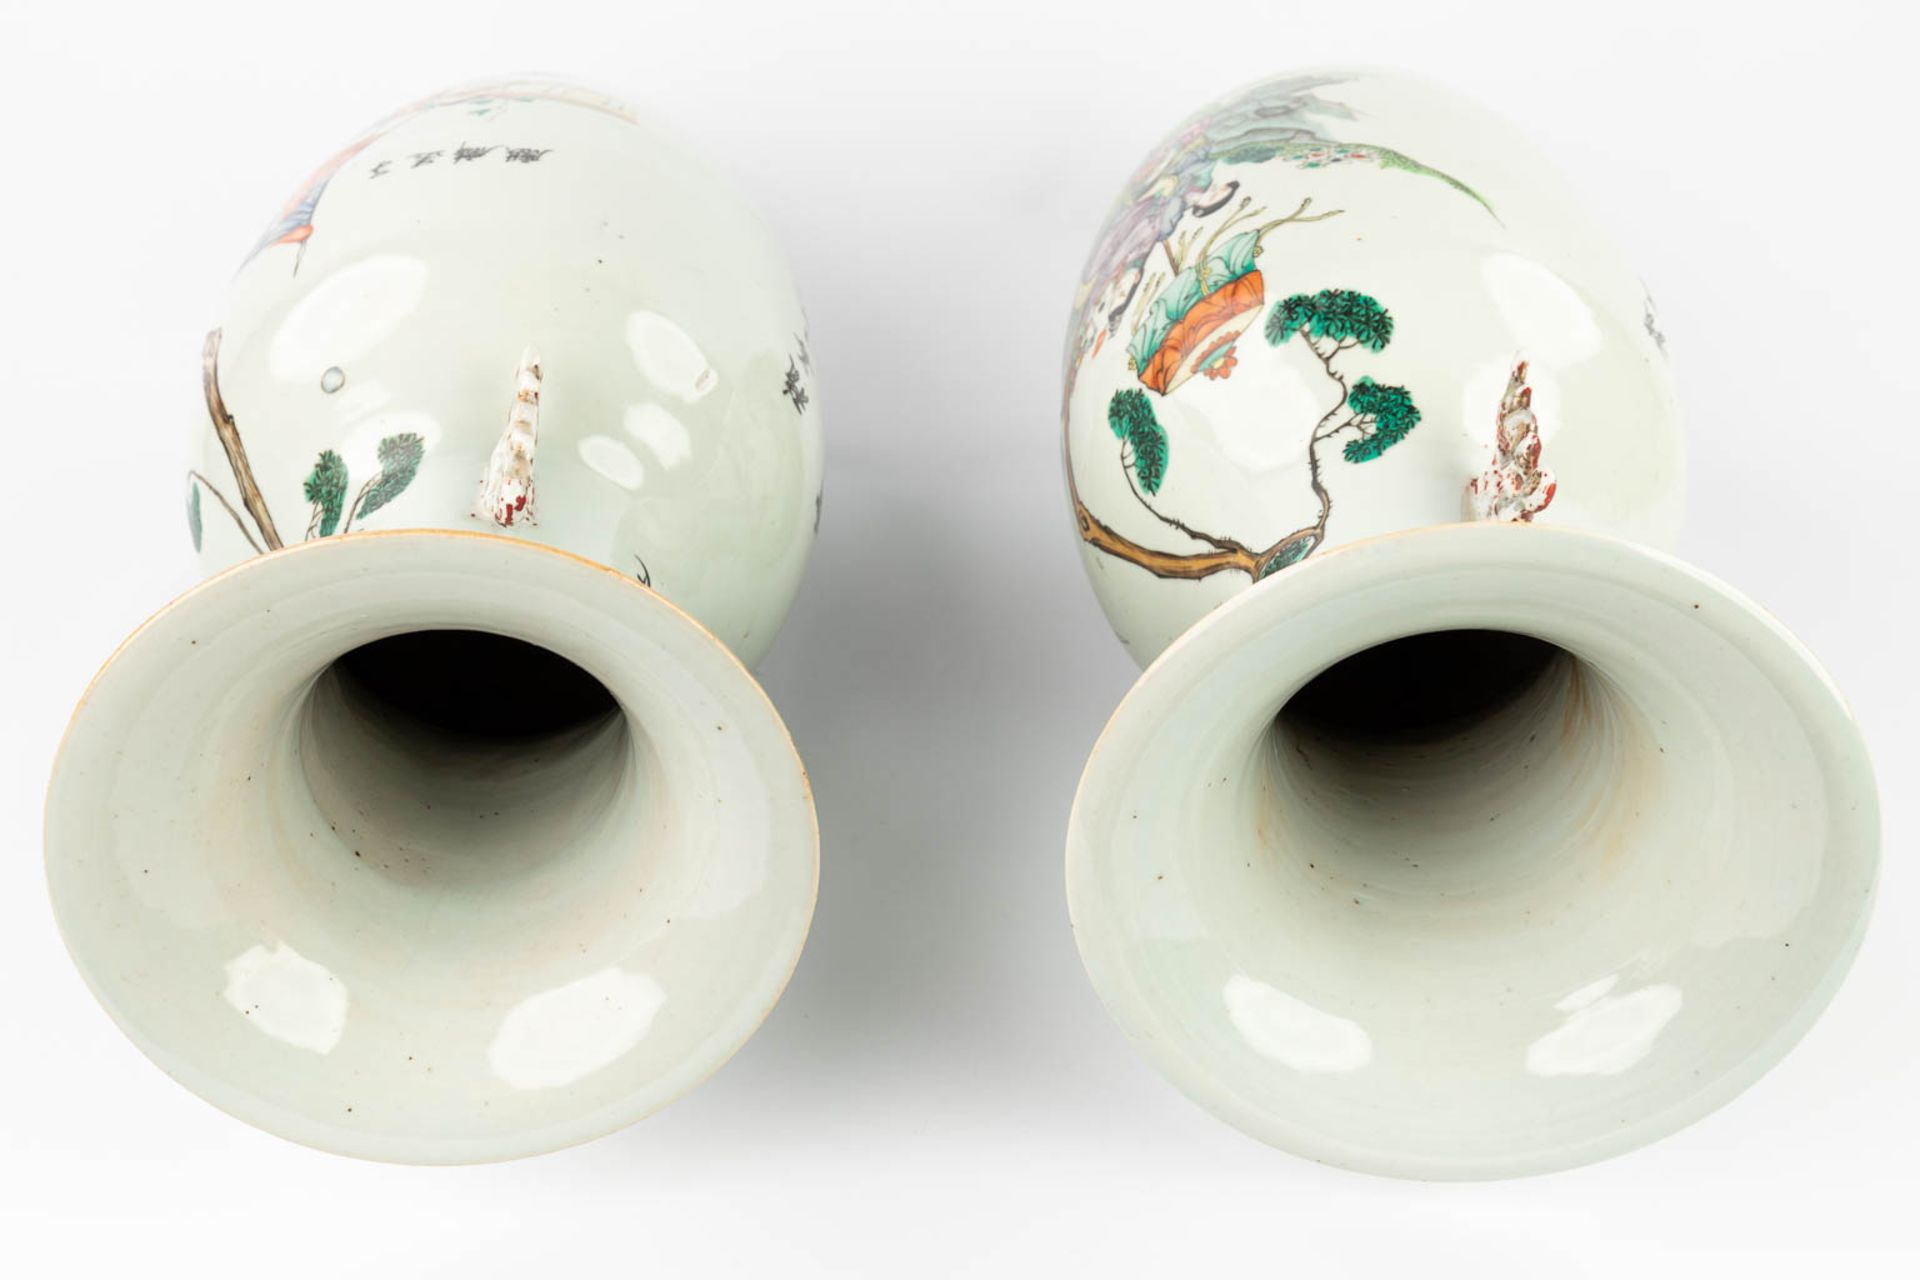 A pair of Chinese vases made of porcelain and decorated with mythological figurines. (58 x 22 cm) - Image 3 of 13